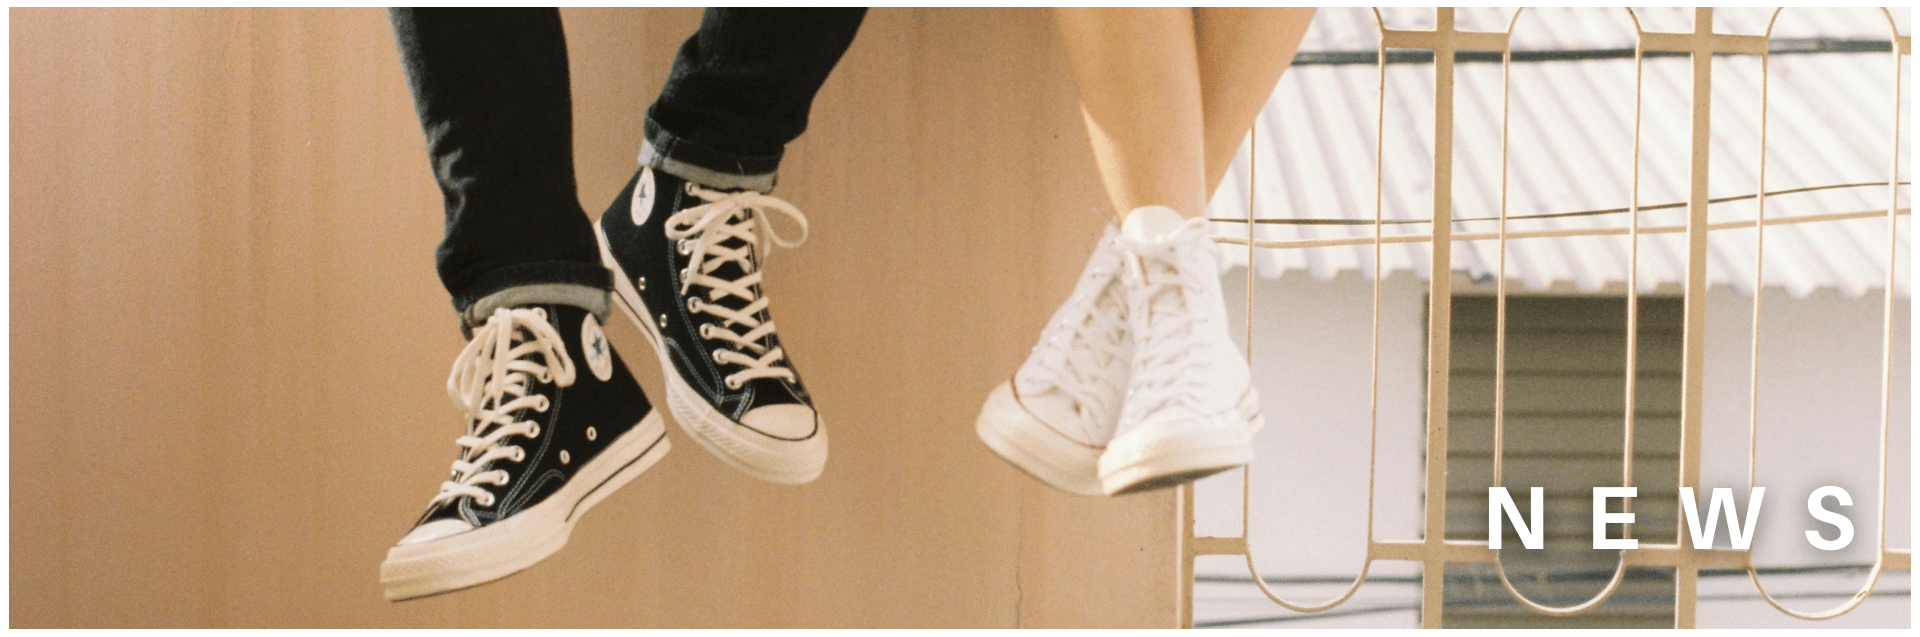 Shoes of two young people who appear to be sitting on a roof